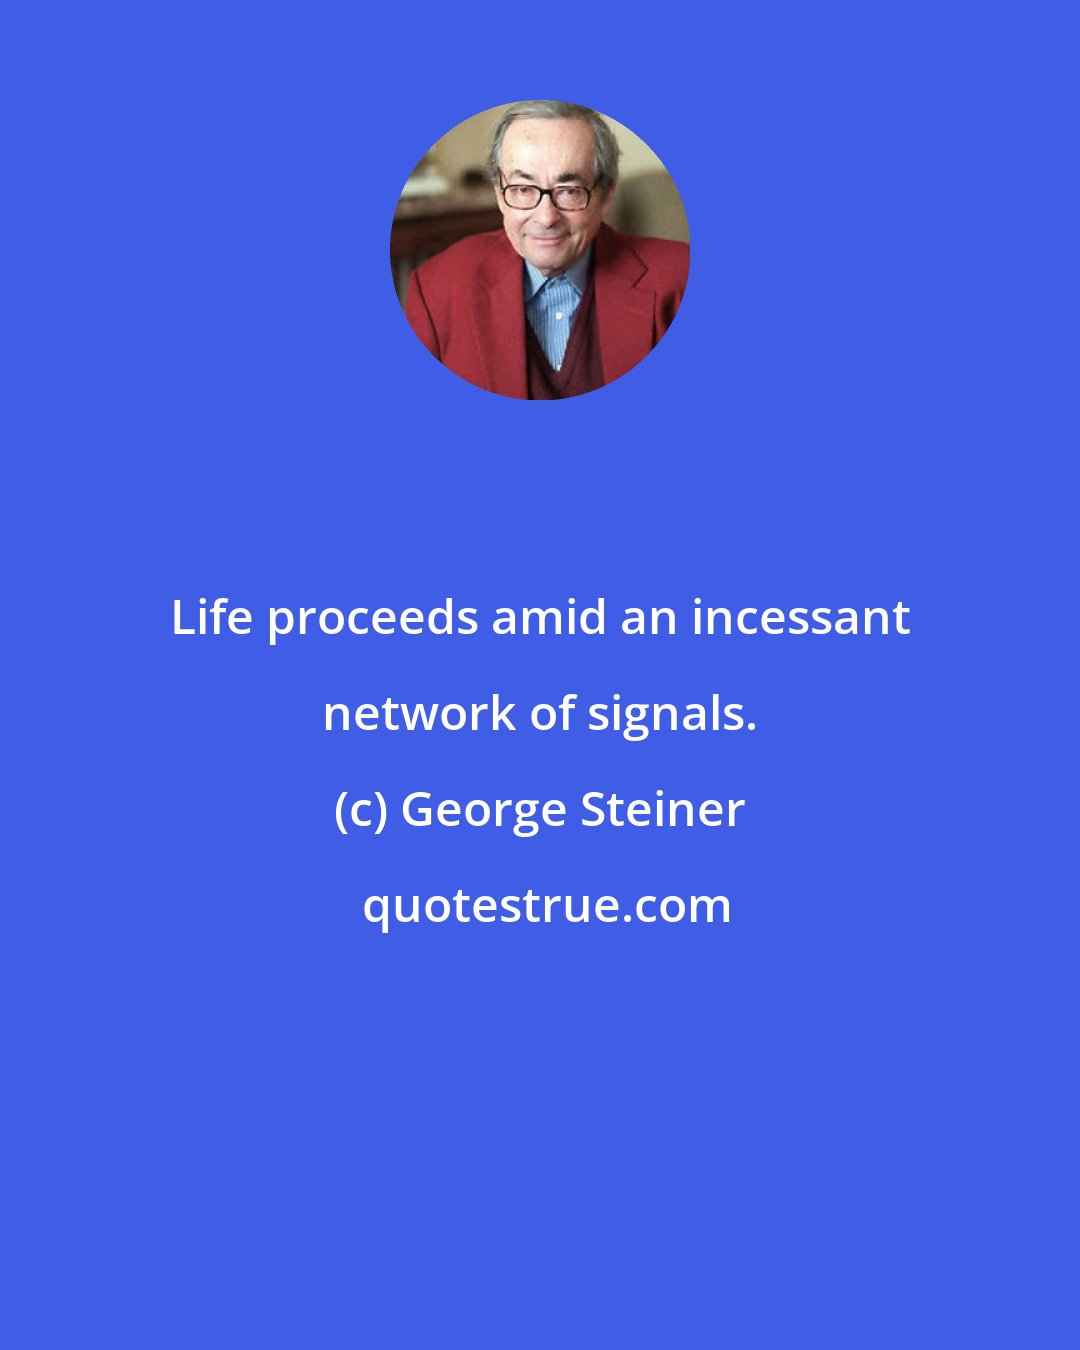 George Steiner: Life proceeds amid an incessant network of signals.